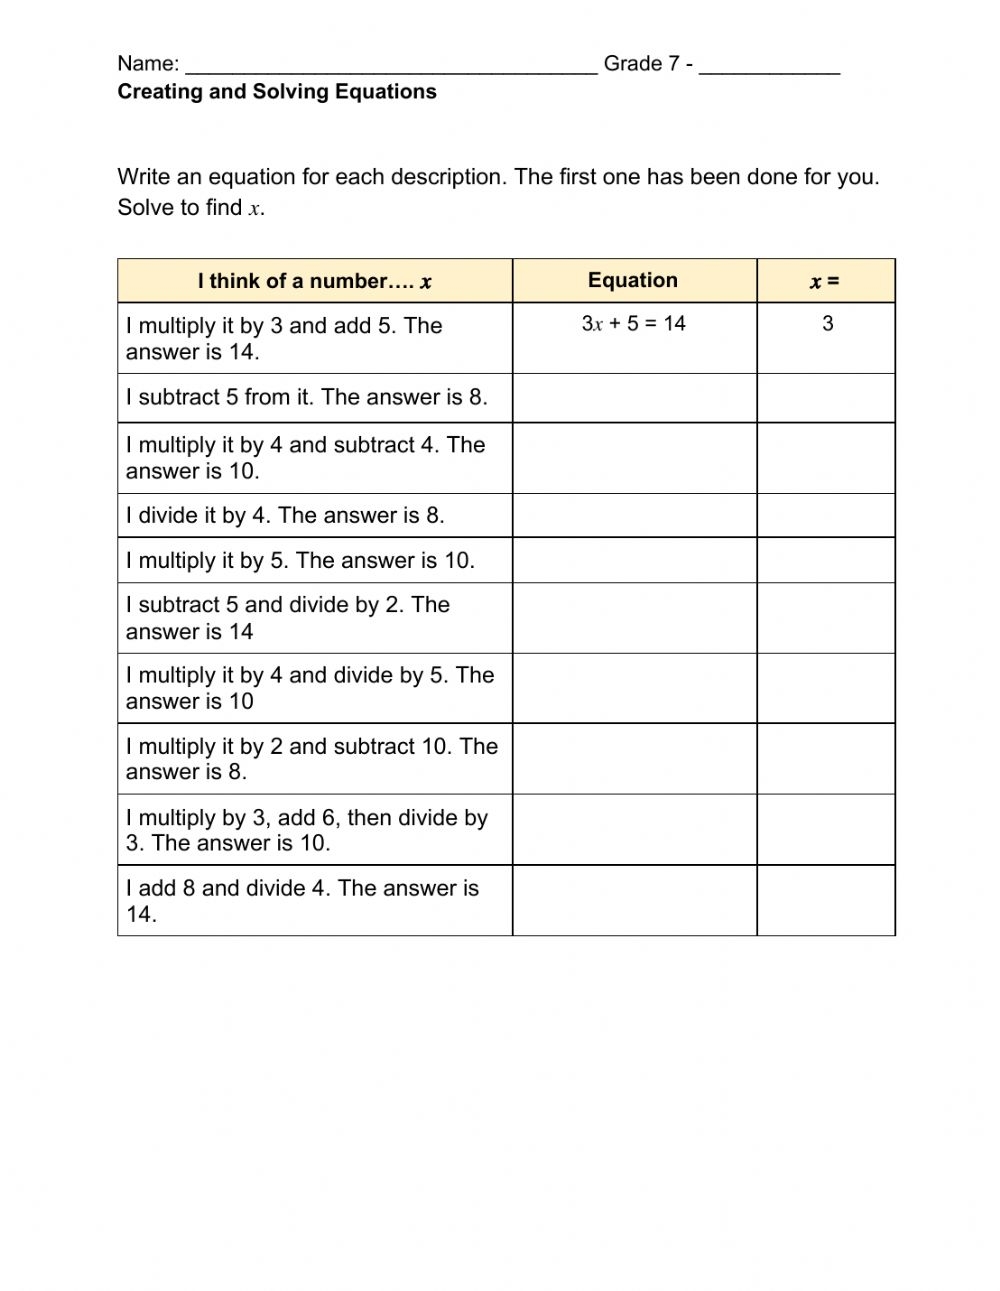 Creating And Solving Equations Worksheet